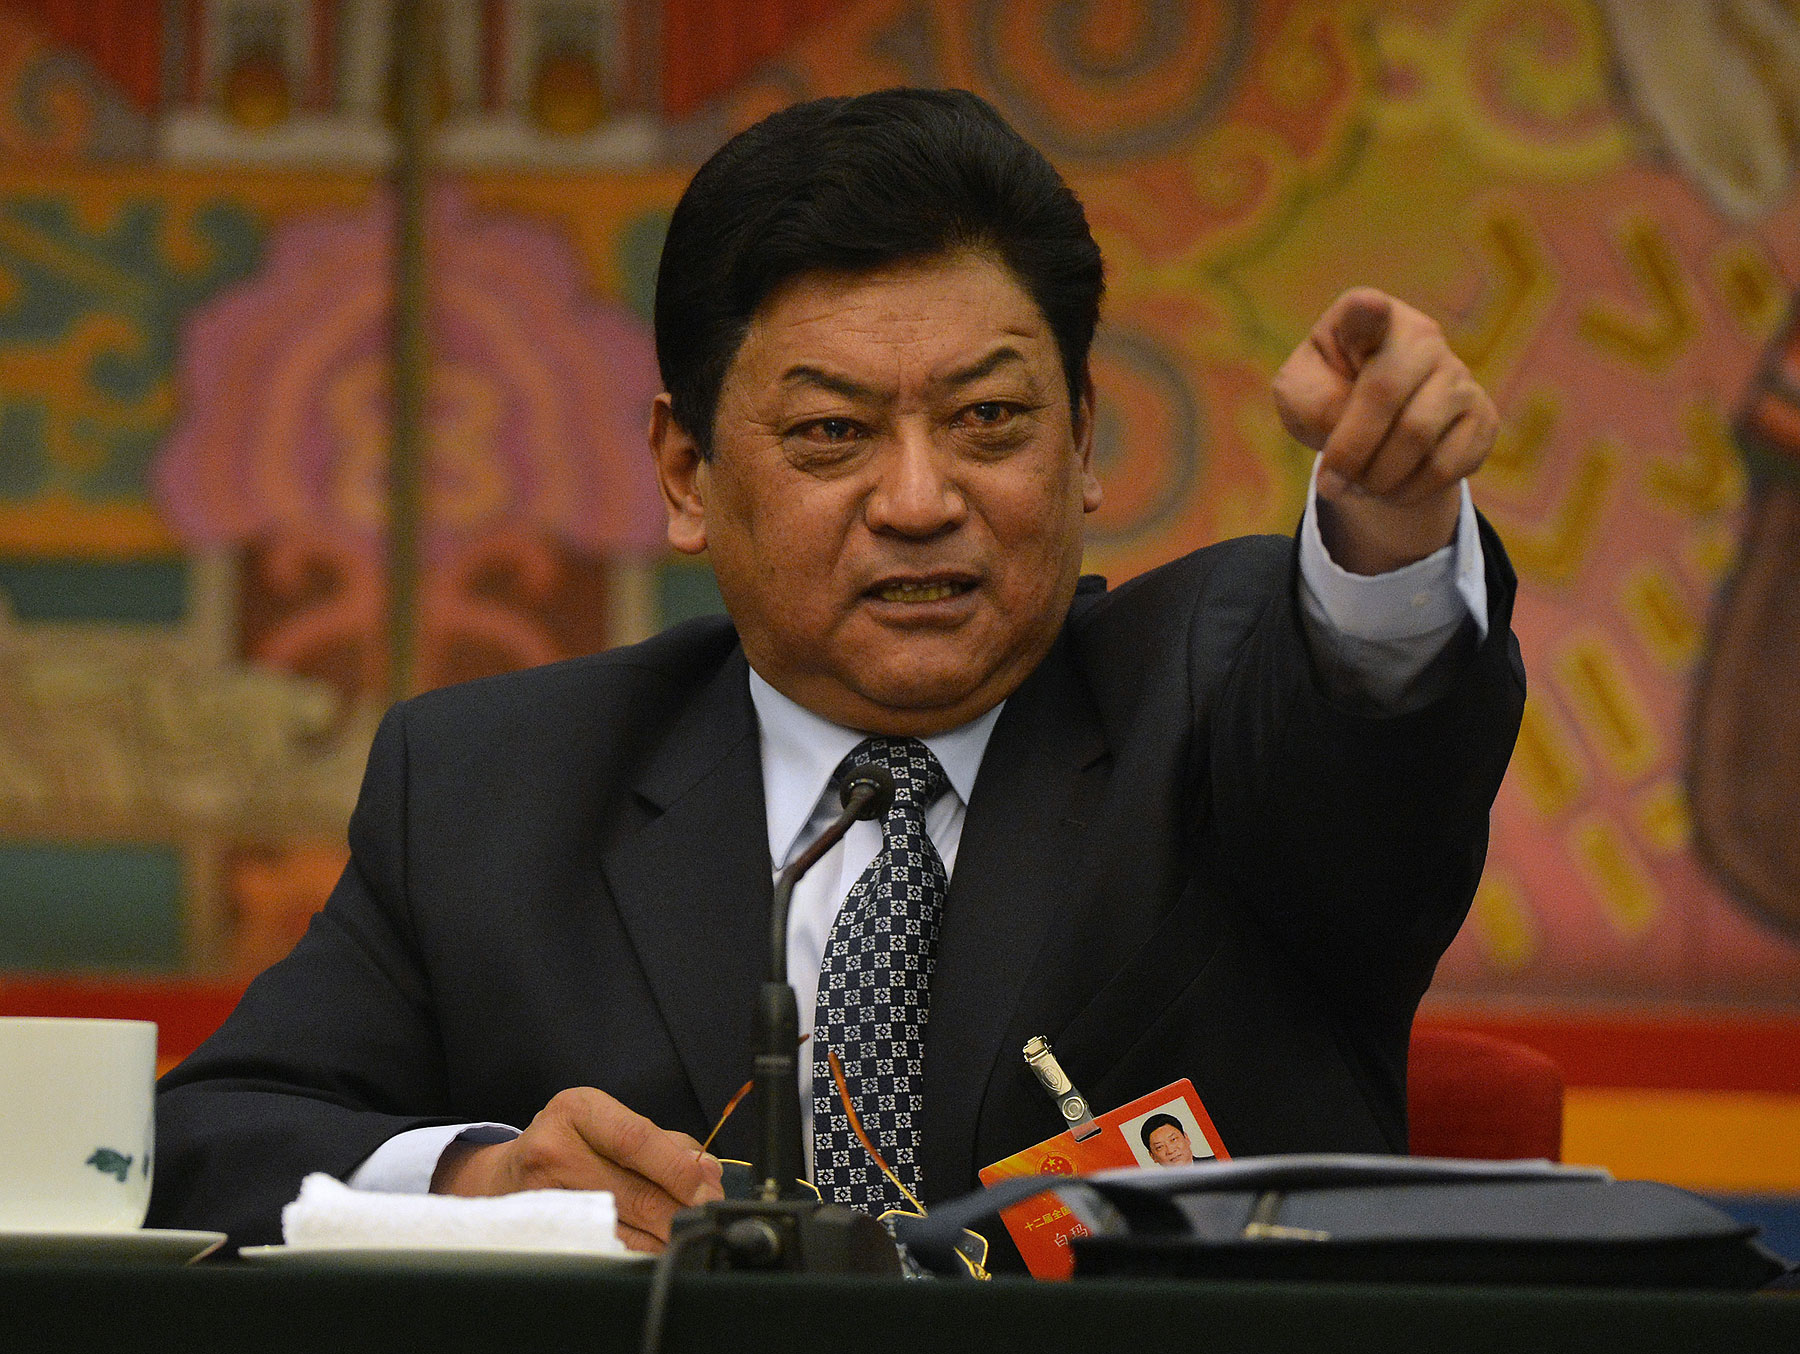 Padma Choling, head of China's Tibet Autonomous Region Congress gestures during their open session in the Great Hall of the people at the National People's Congress in Beijing on March 8, 2013 (Mark Ralston—AFP/Getty Images)